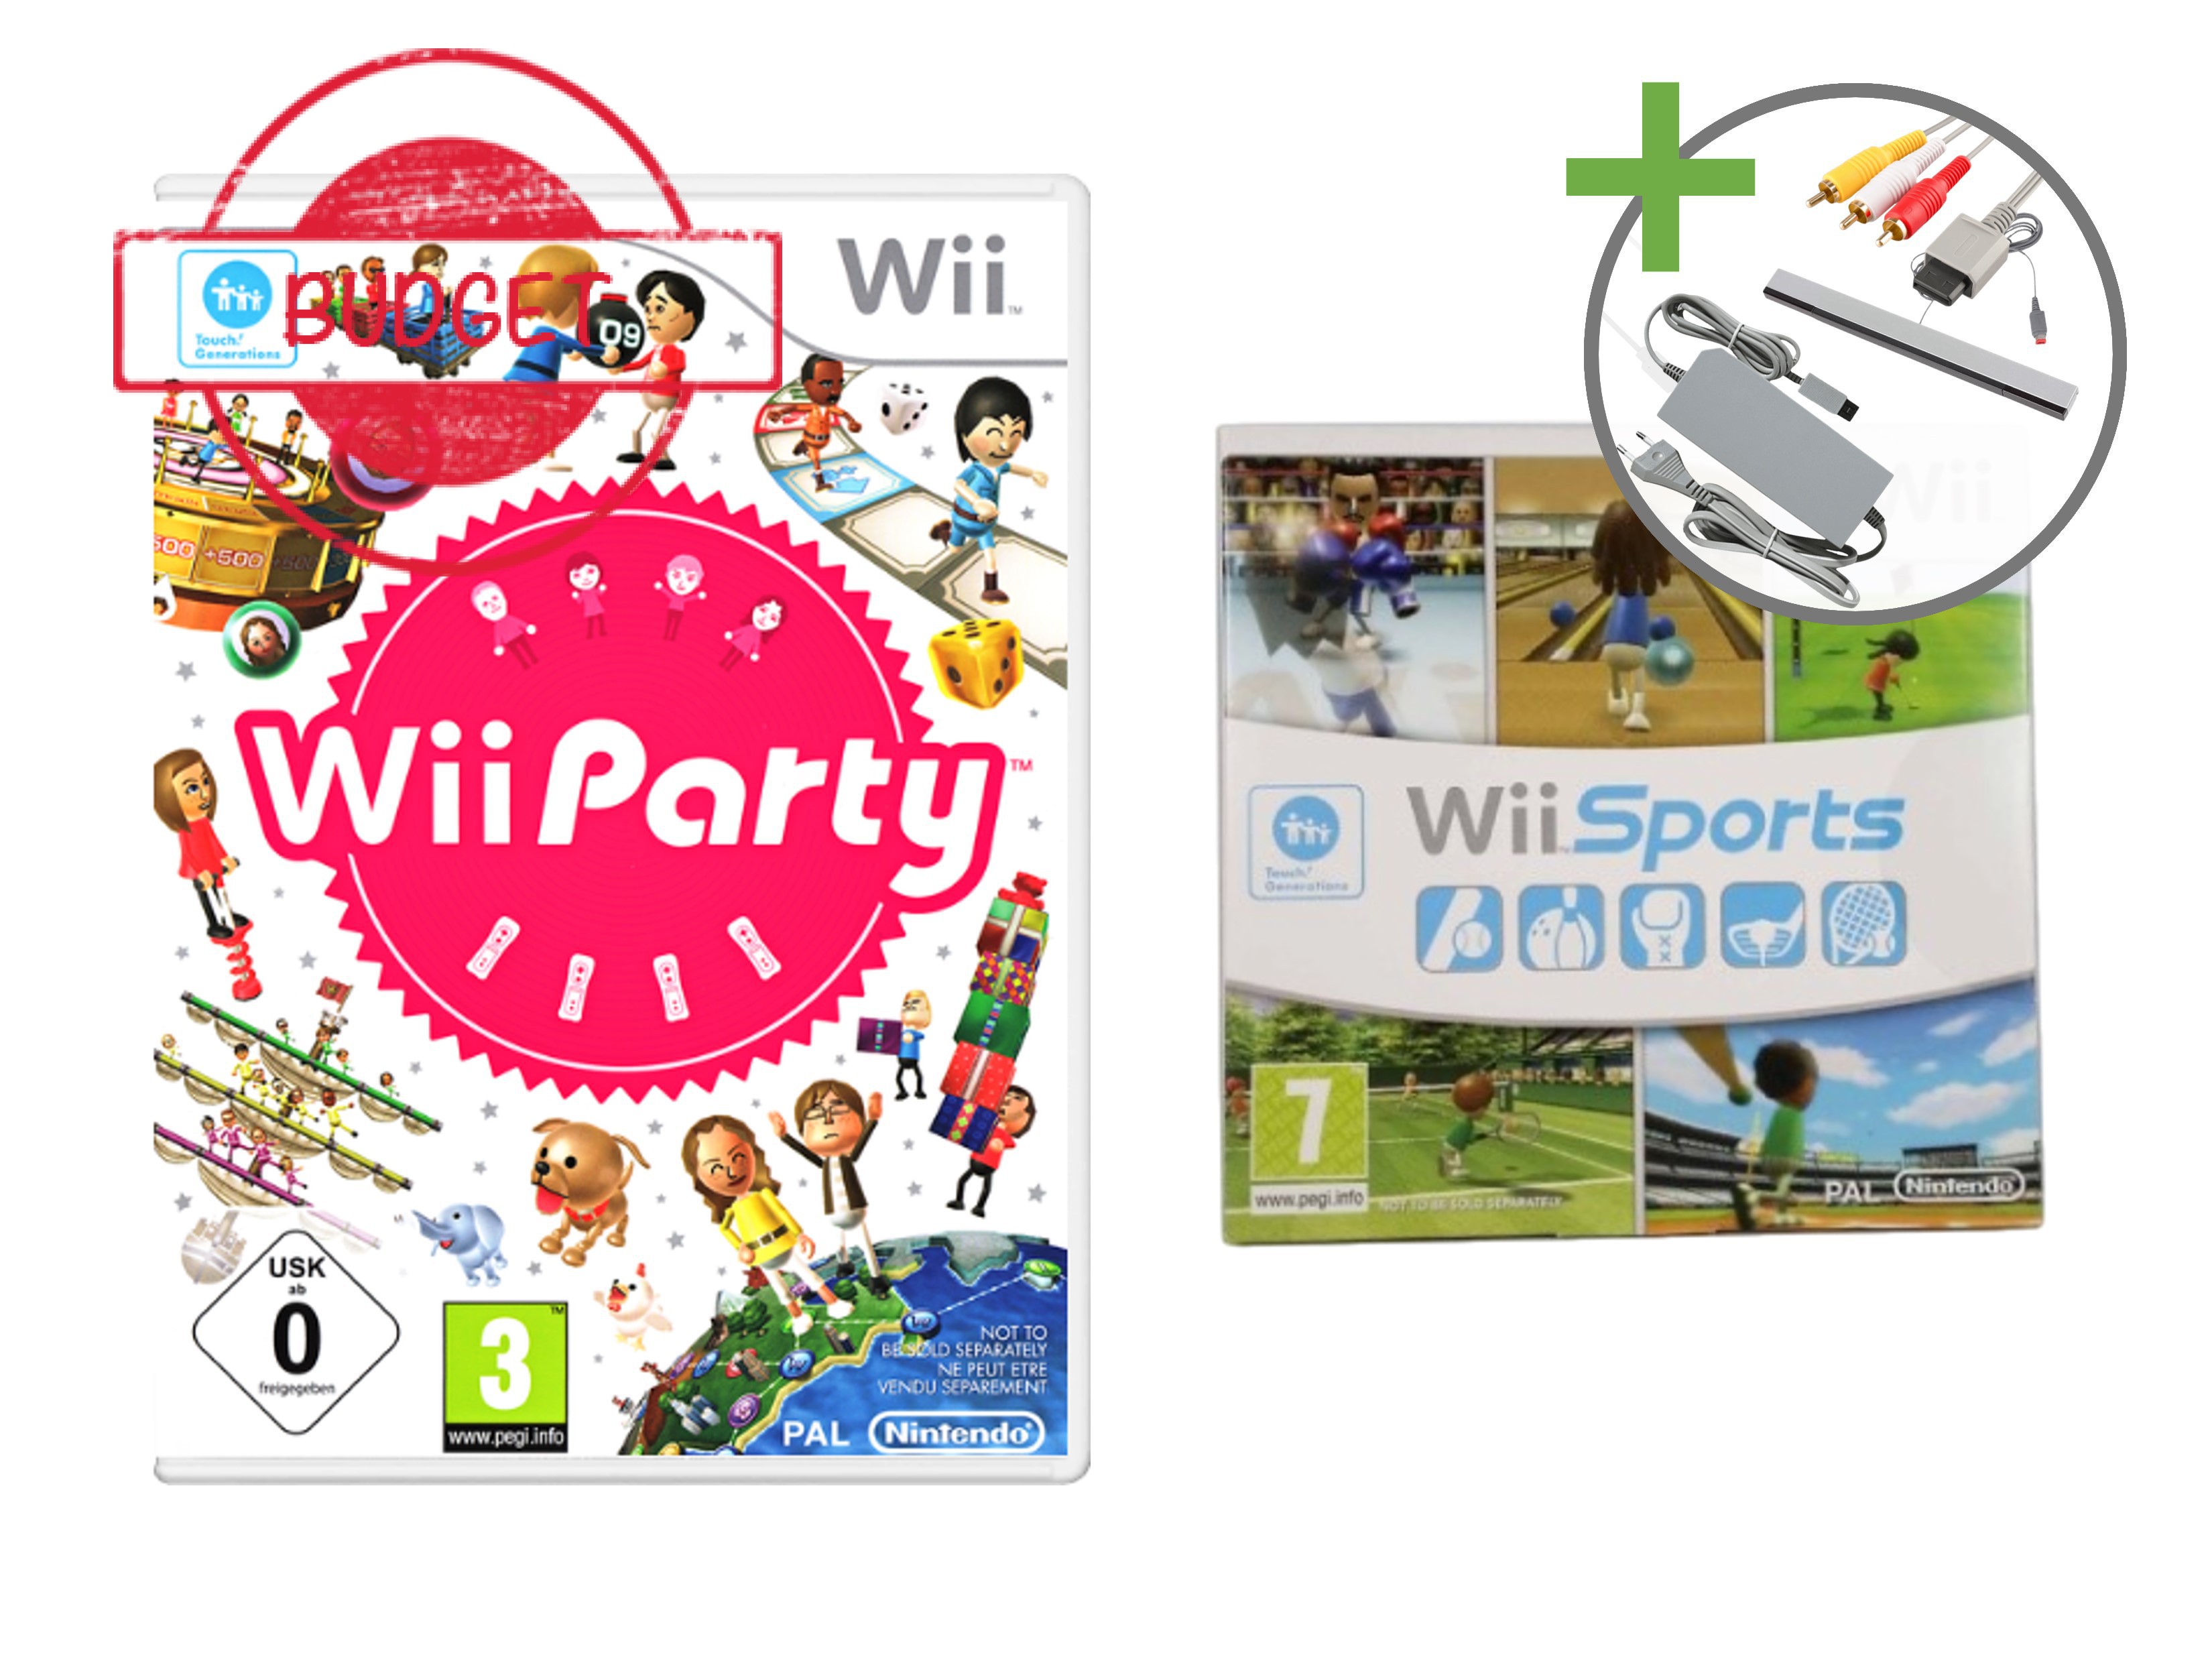 Nintendo Wii Starter Pack - Wii Family Edition - Budget - Wii Hardware - 4